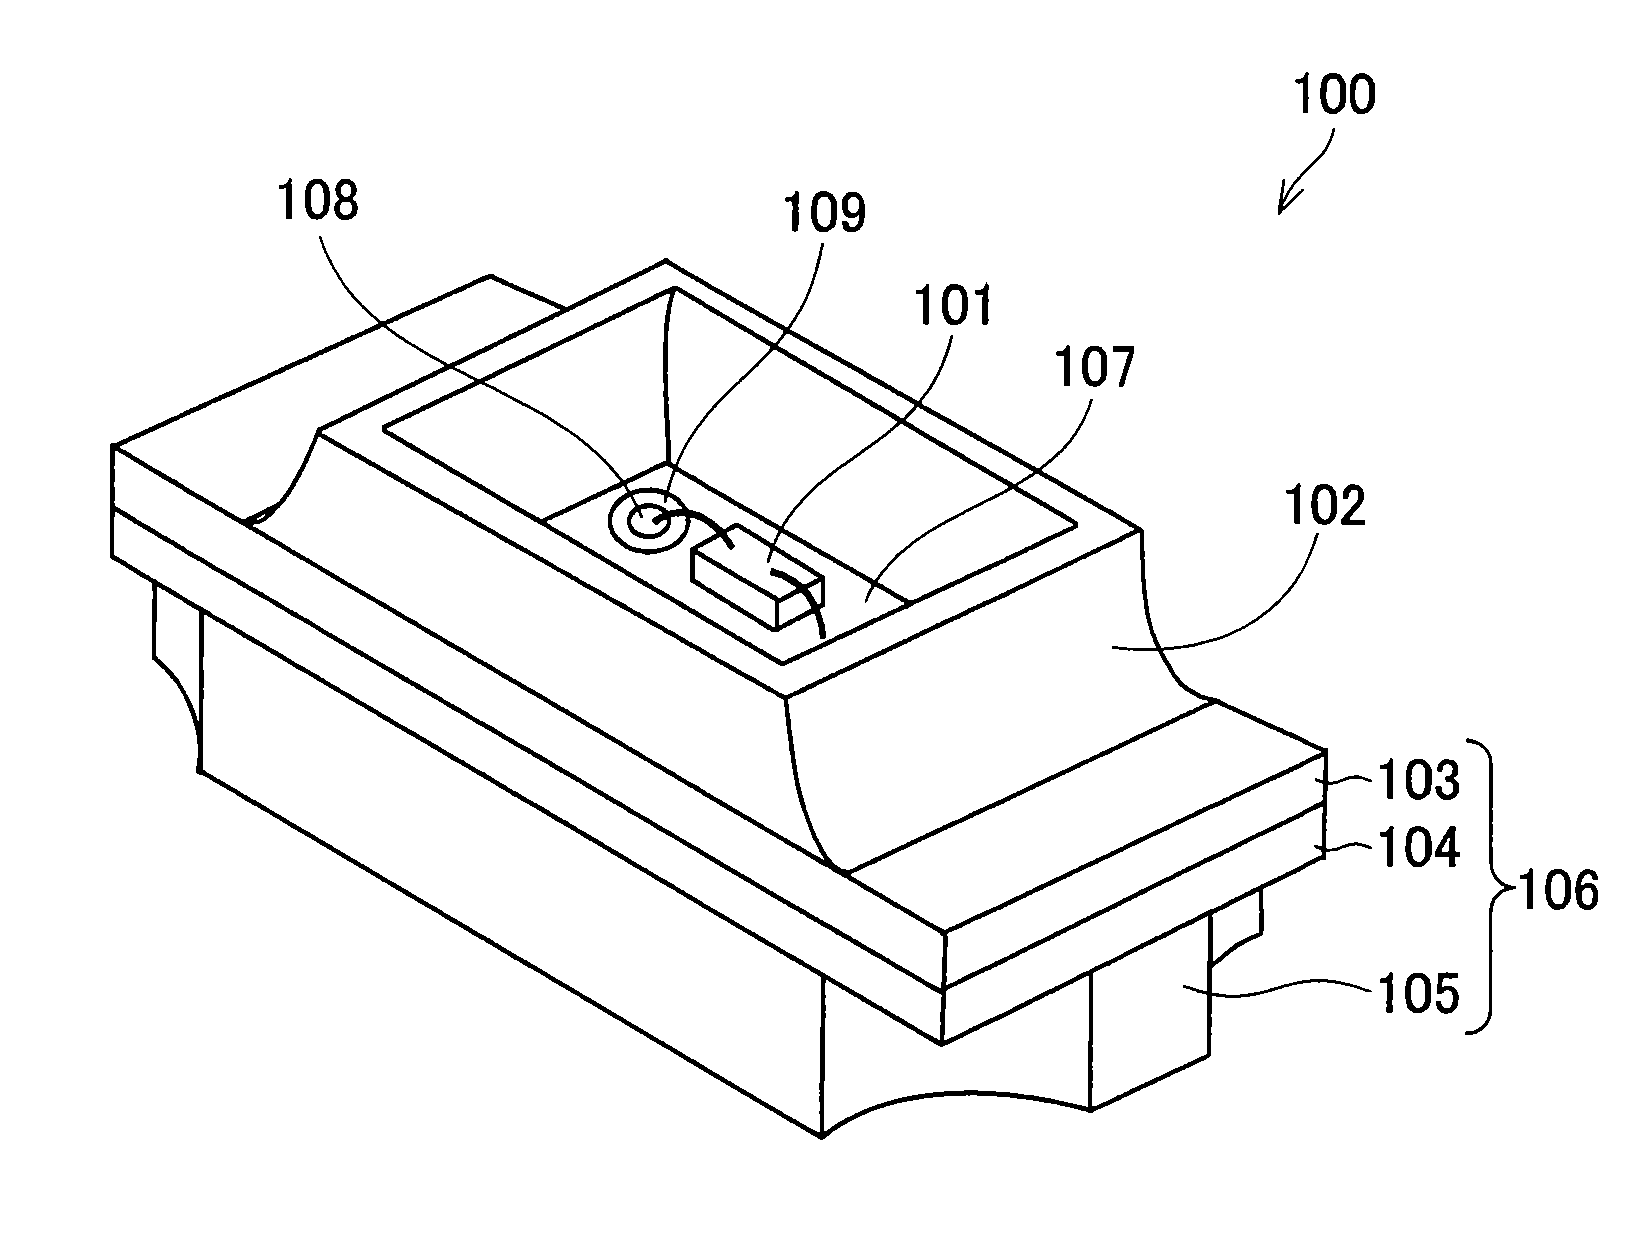 Method for manufacturing light reflecting metal wall